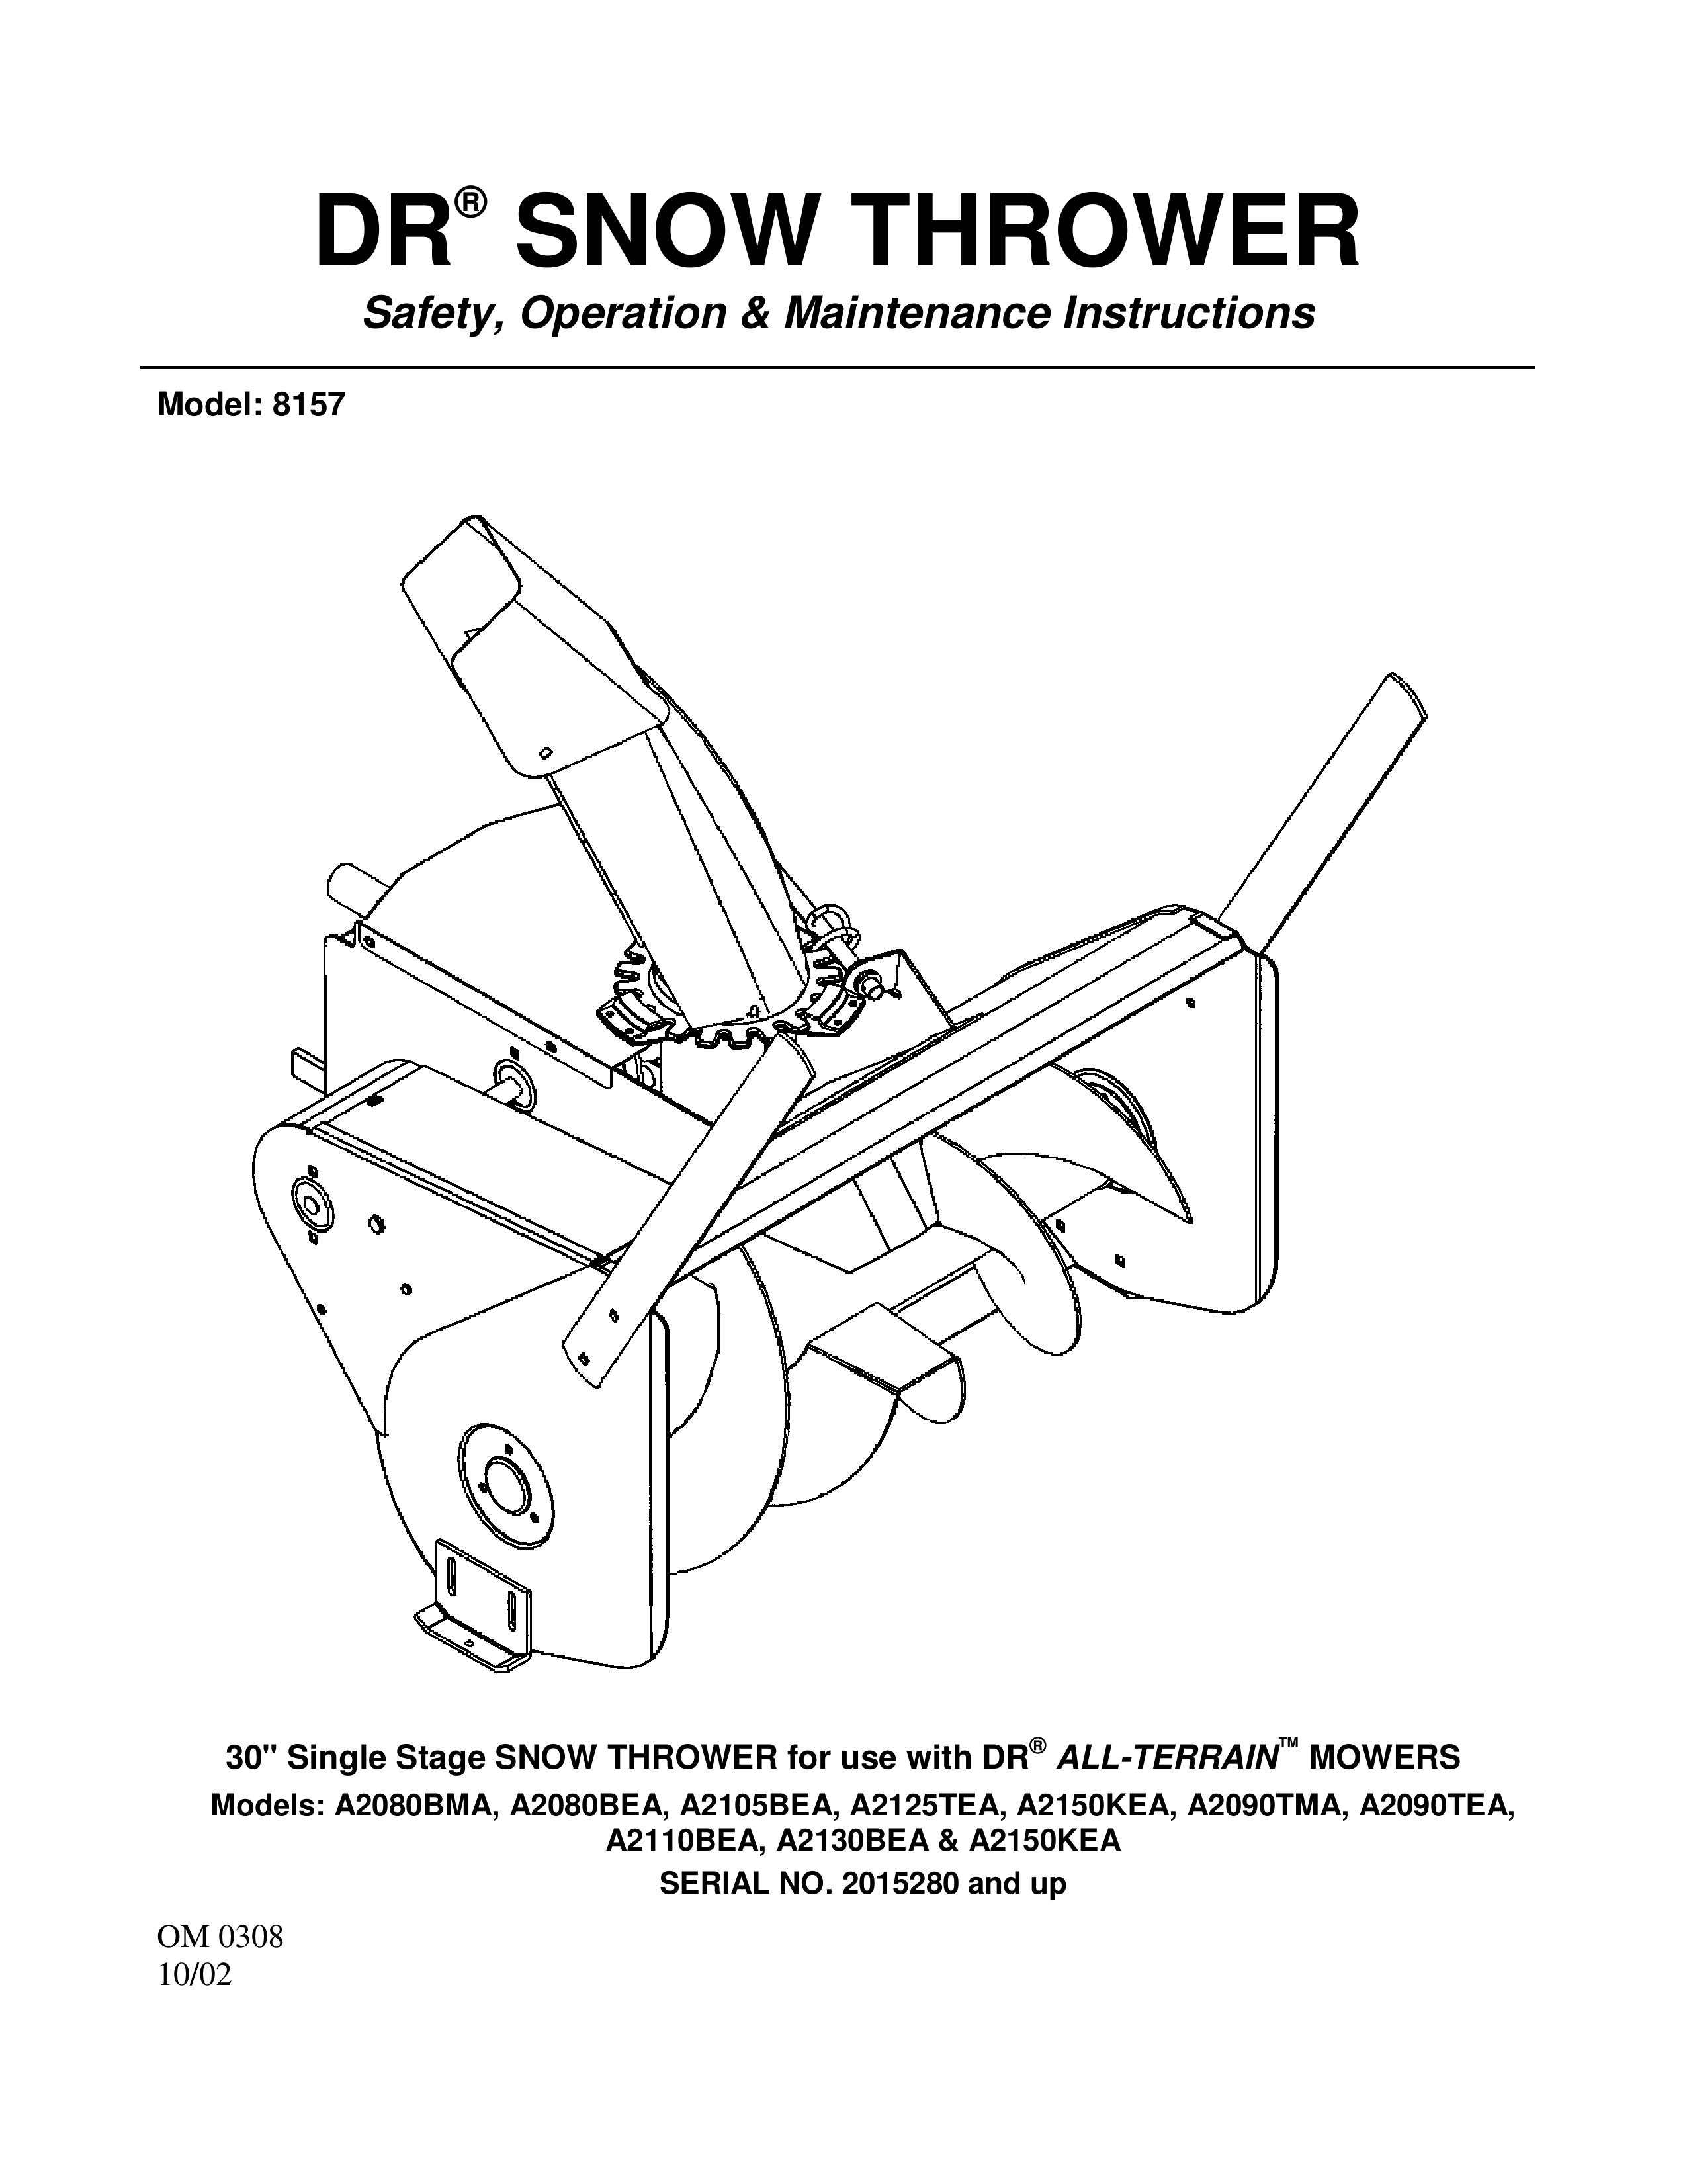 Country Home Products A2130BEA Snow Blower User Manual